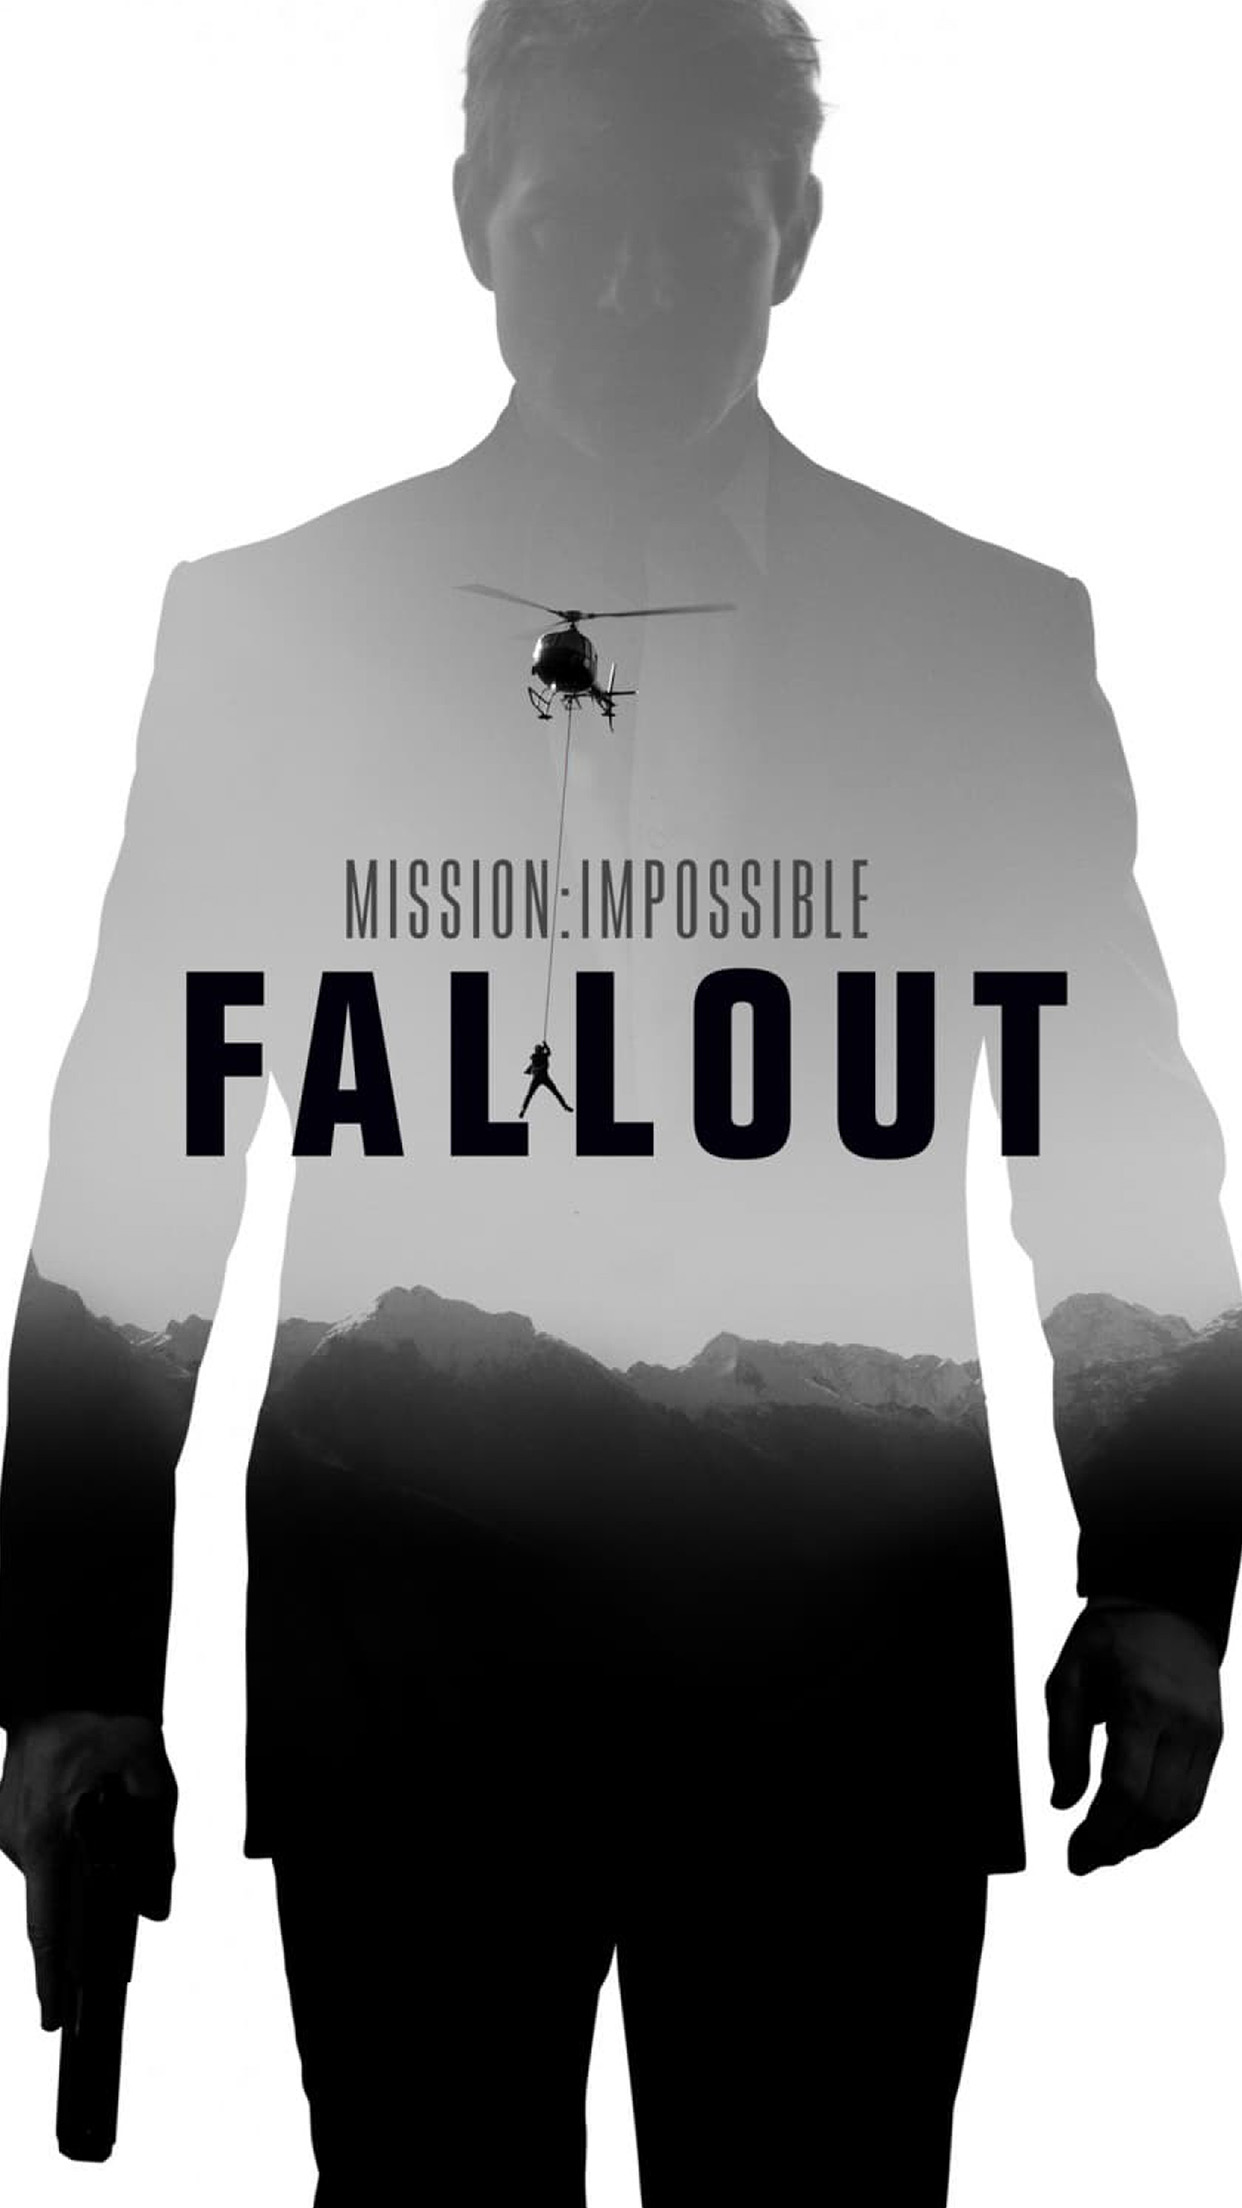 Mission Impossible Film Fallout Poster Art Bw